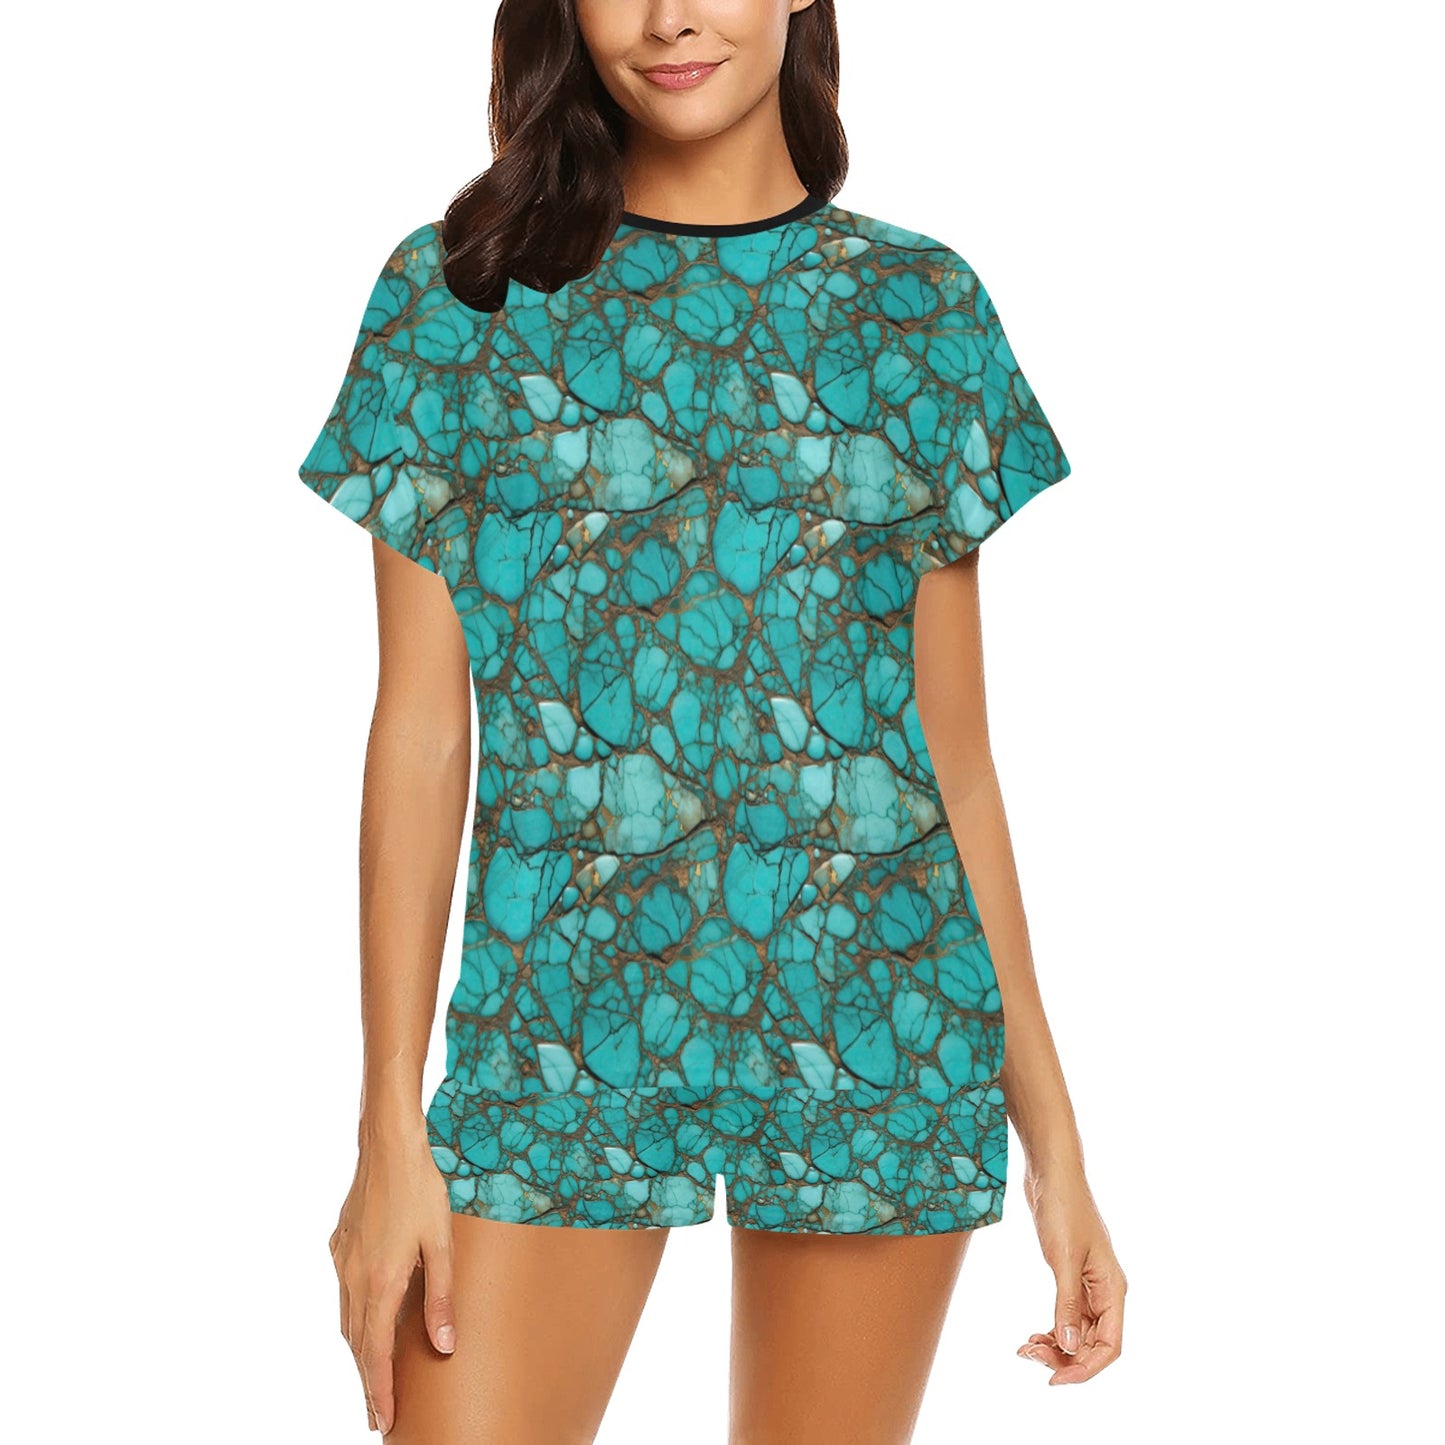 All Turquoise Women's Top and Shorts Pajama Set